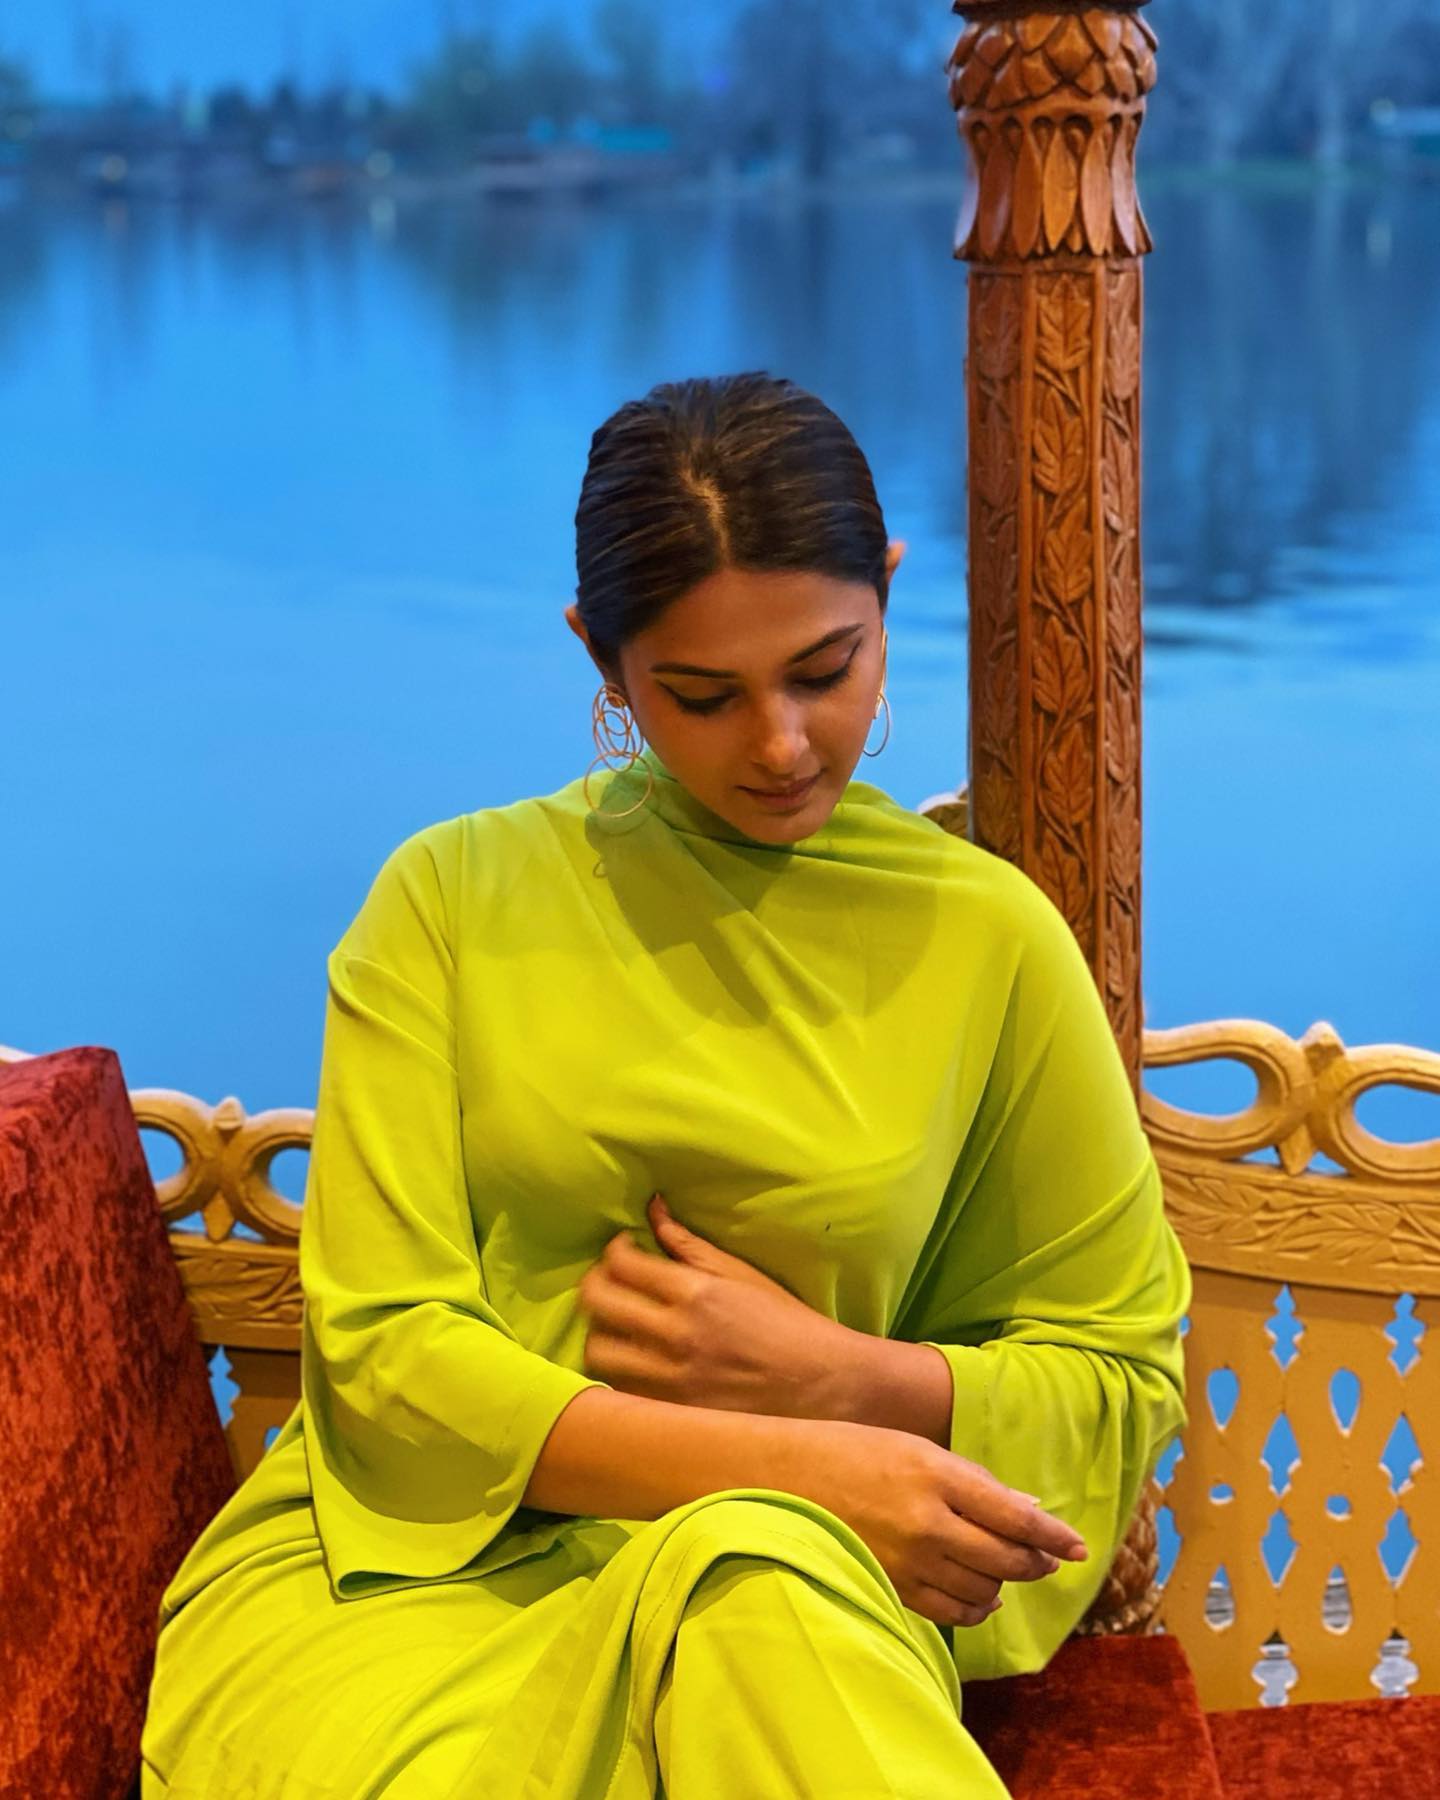 275445099 492615695602599 7278221663349519533 n This little Pooja, who was seen with Aishwarya Rai in the film 'Kuch Na Kaho', has become a superstar of the small screen, see photos